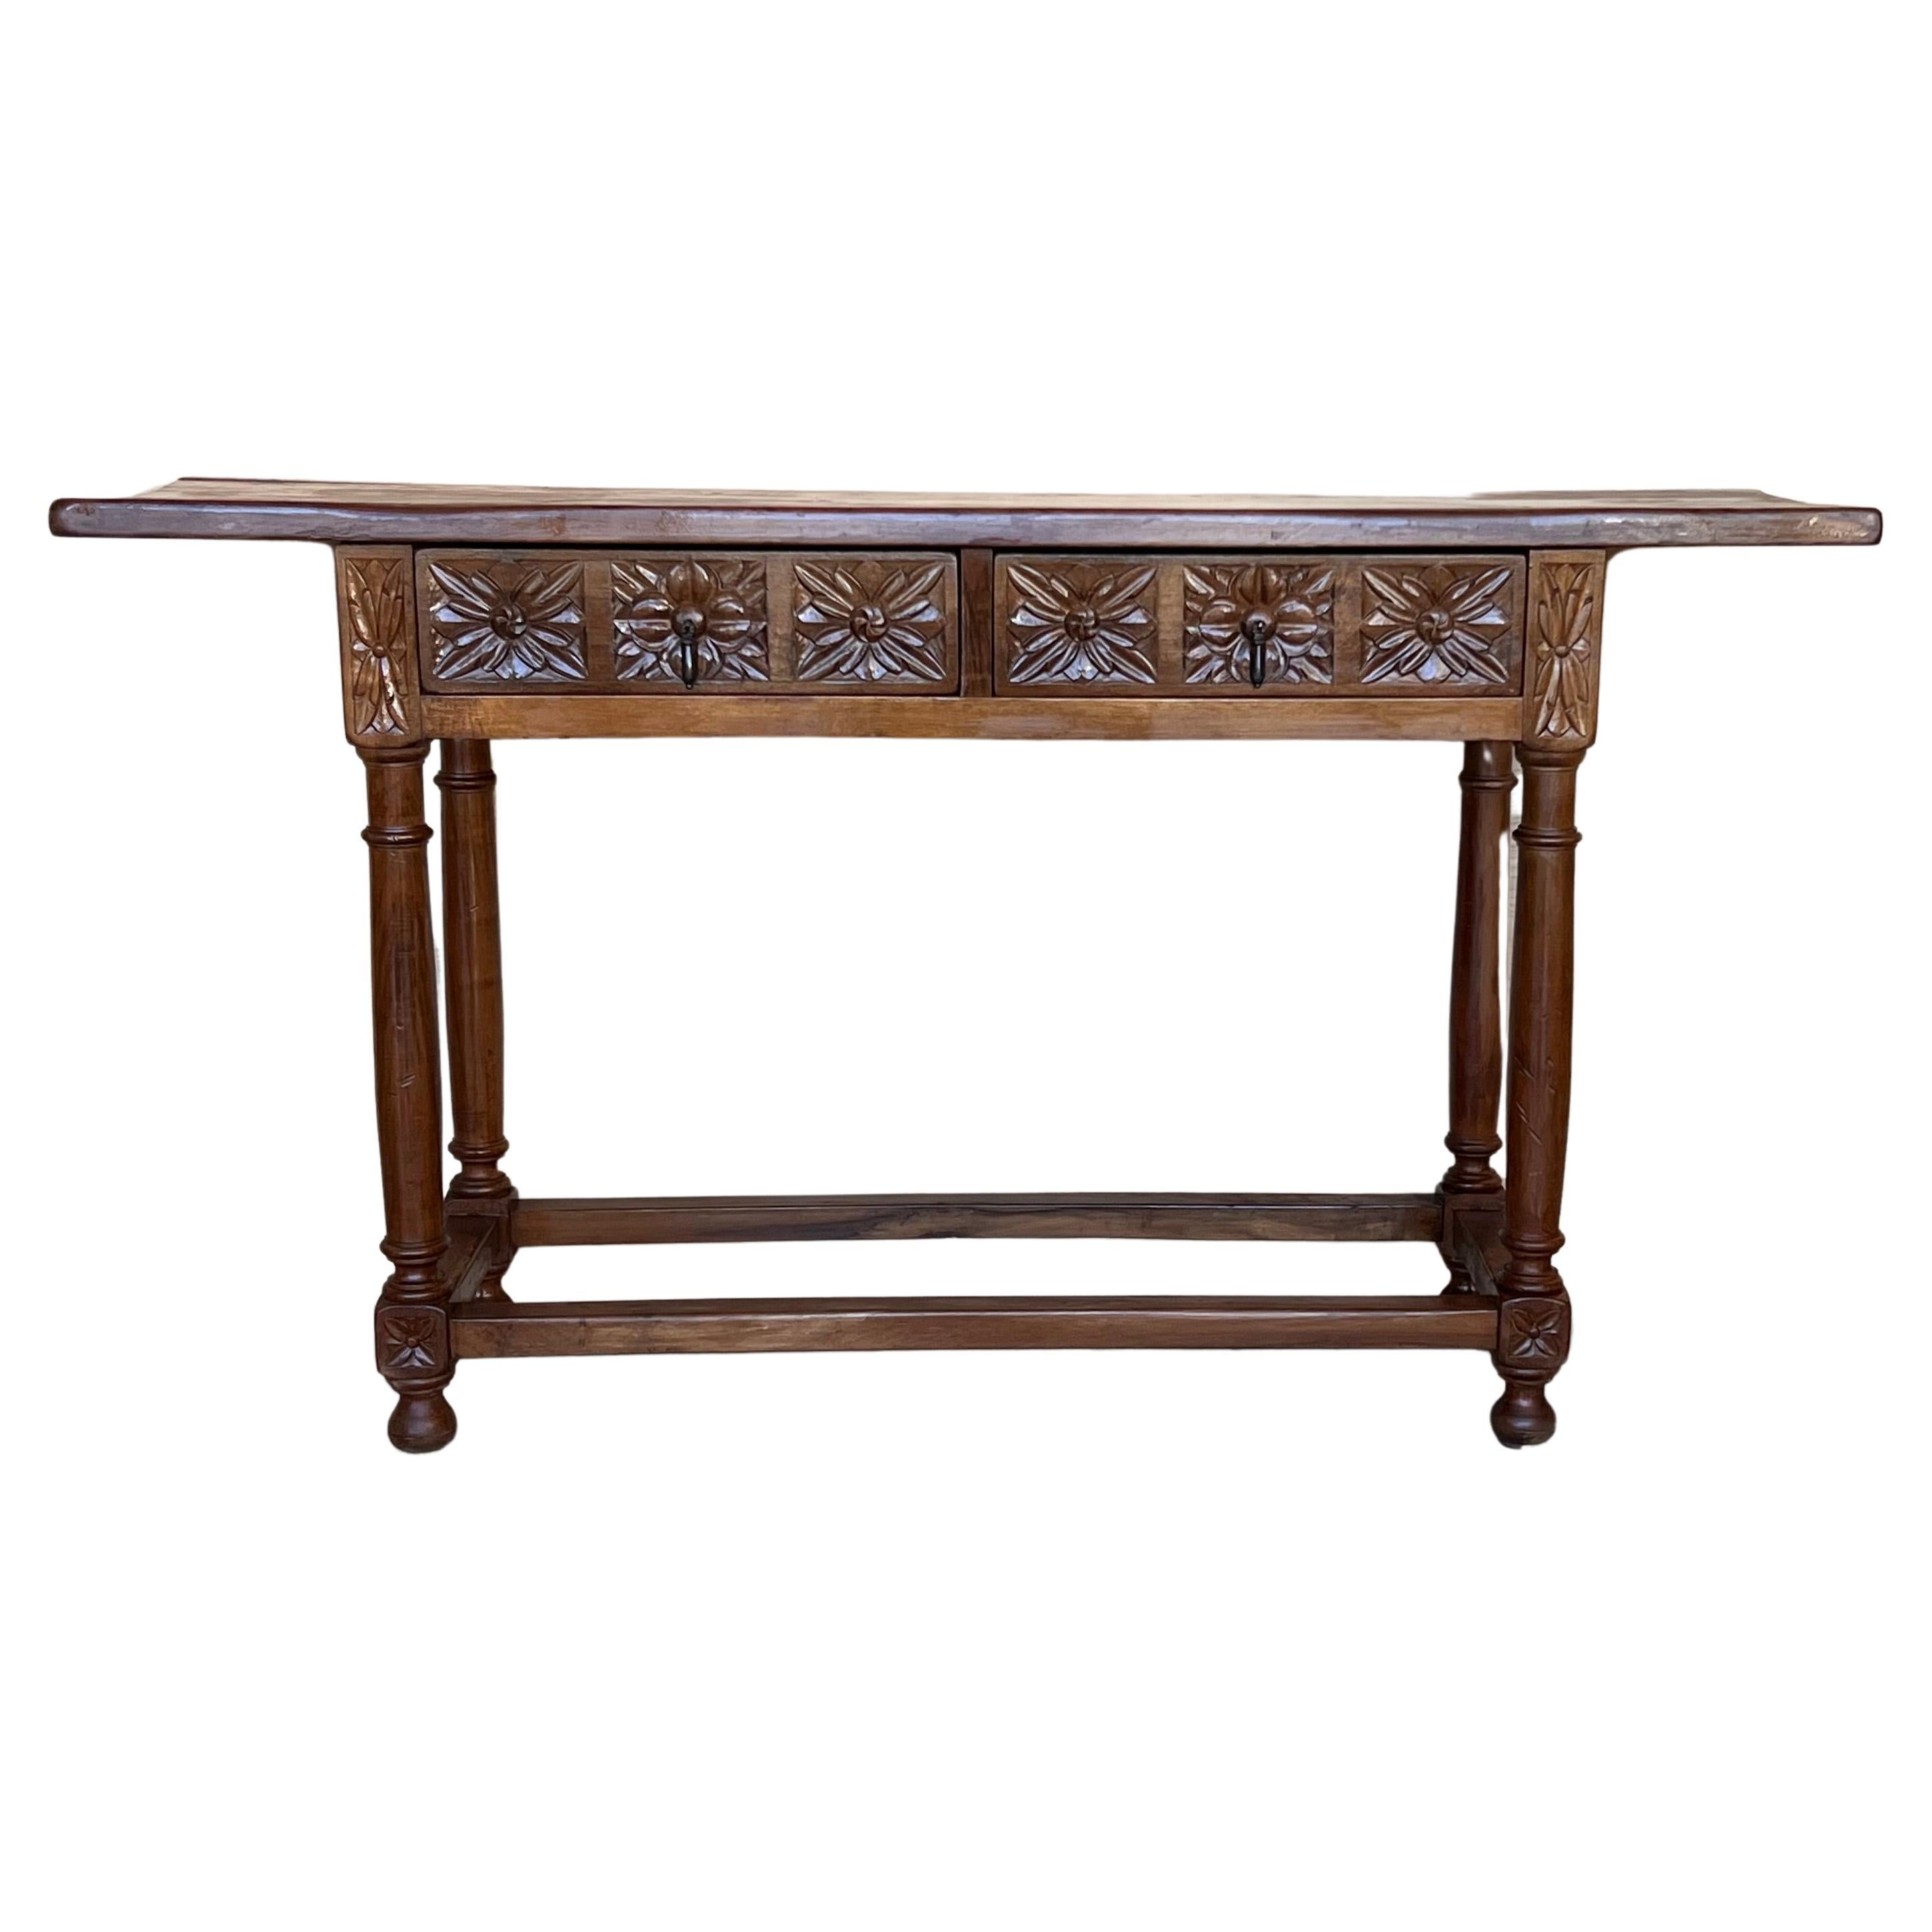 Early 20th Century Spanish Carved Console Table with Two drawers